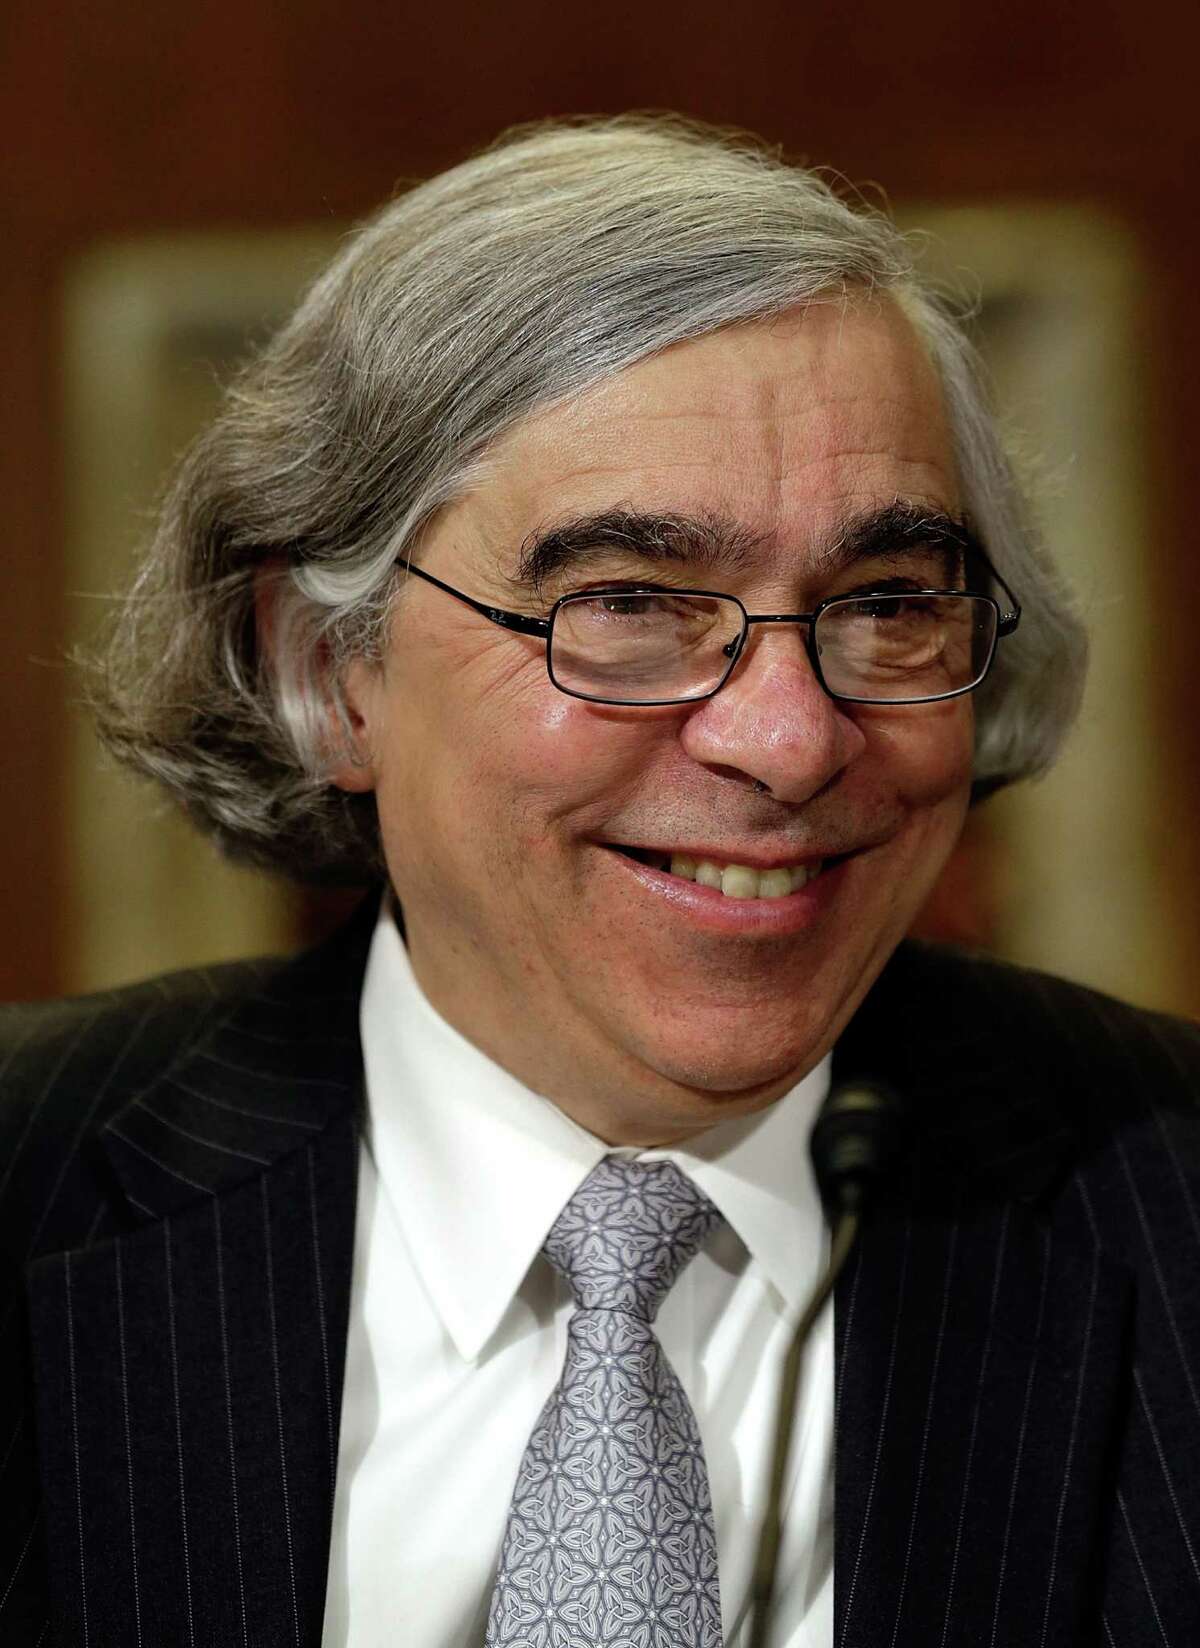 Energy nominee Ernest Moniz said he'd weigh the “cumulative” effects of selling more natural gas overseas.